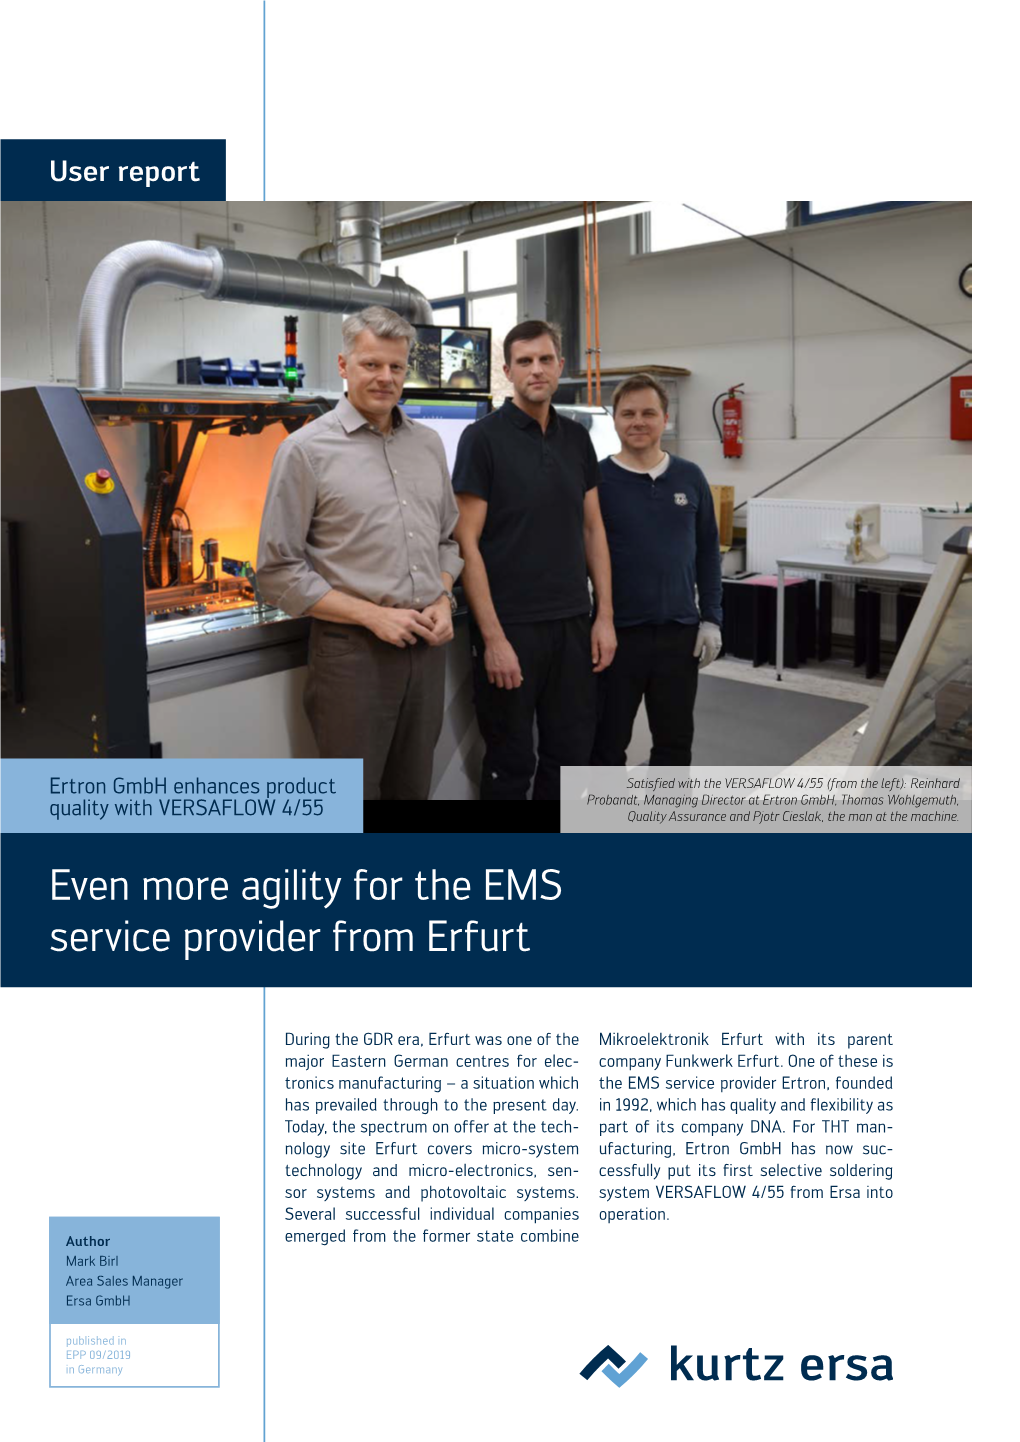 Even More Agility for the EMS Service Provider from Erfurt